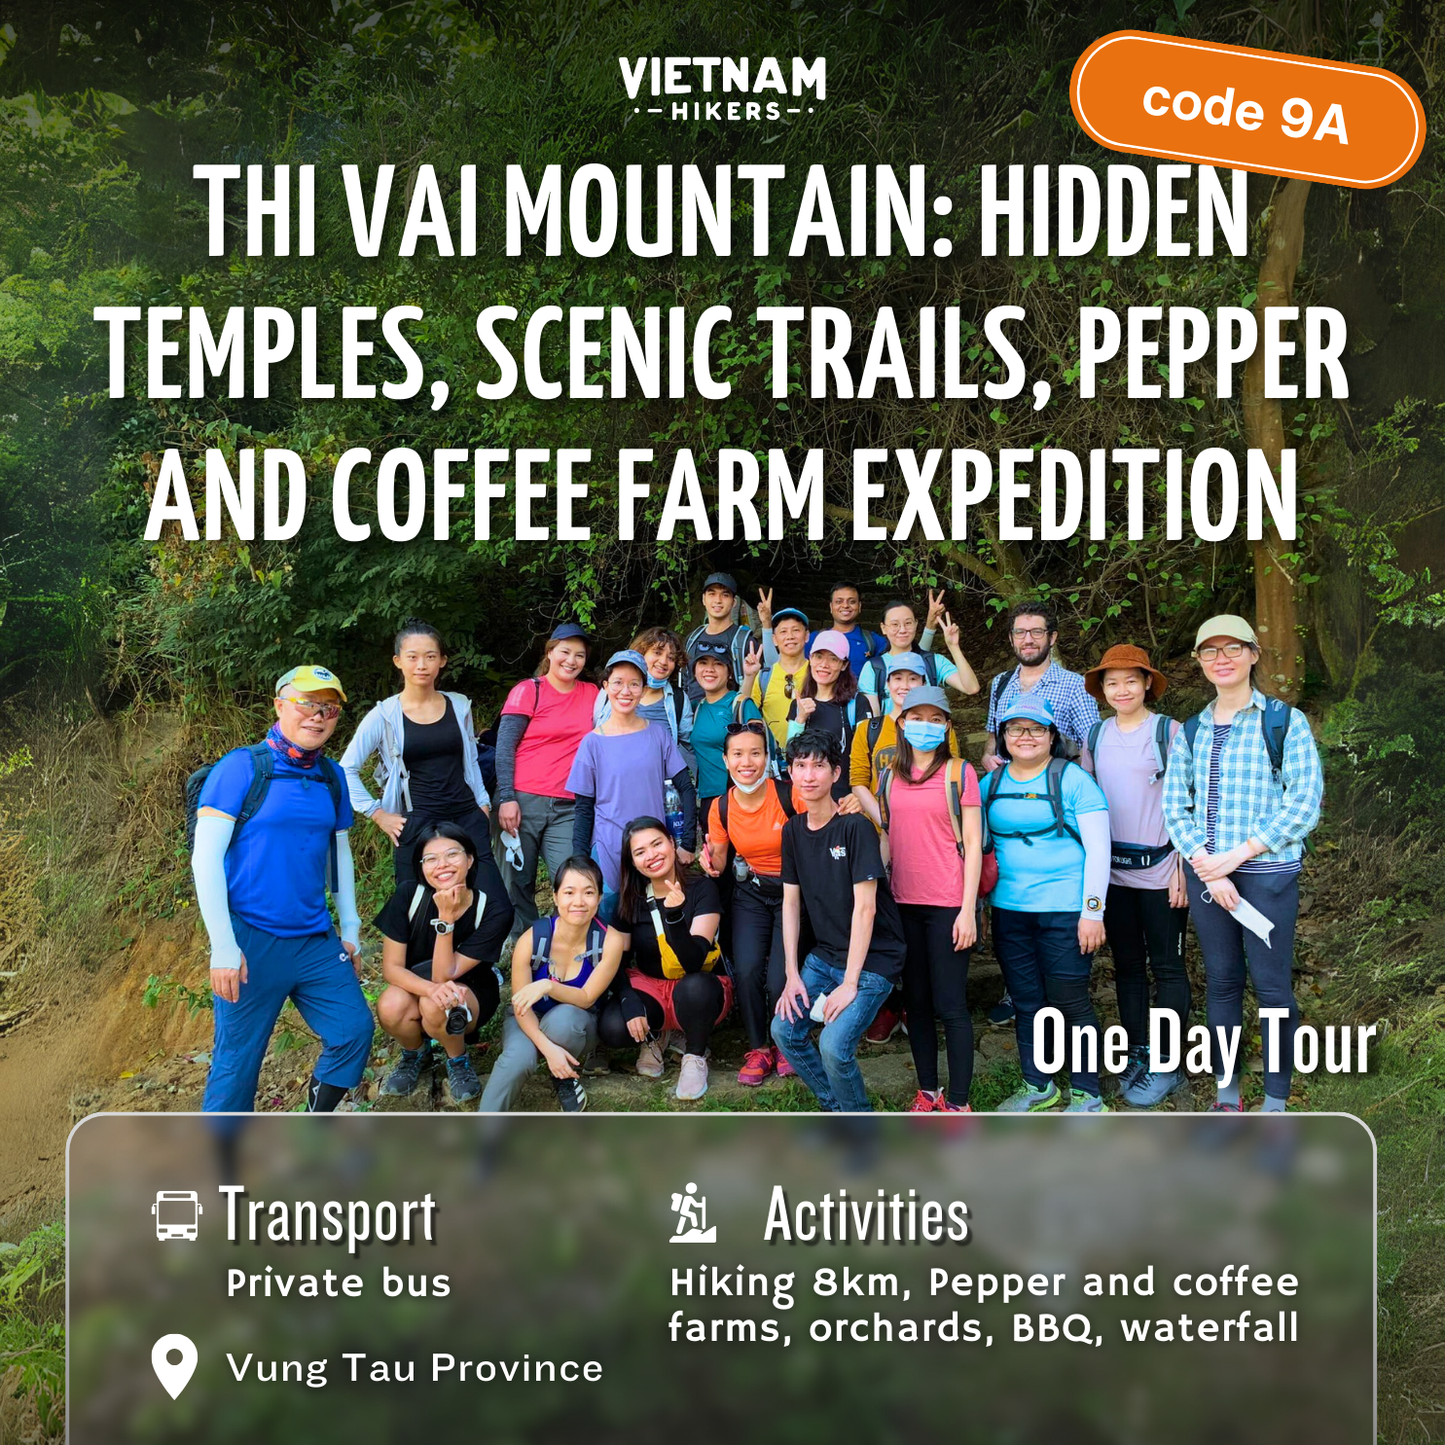 9A: Thi Vai Mountain: Hidden Temples, Scenic Trails, Pepper and Coffee Farm Expedition